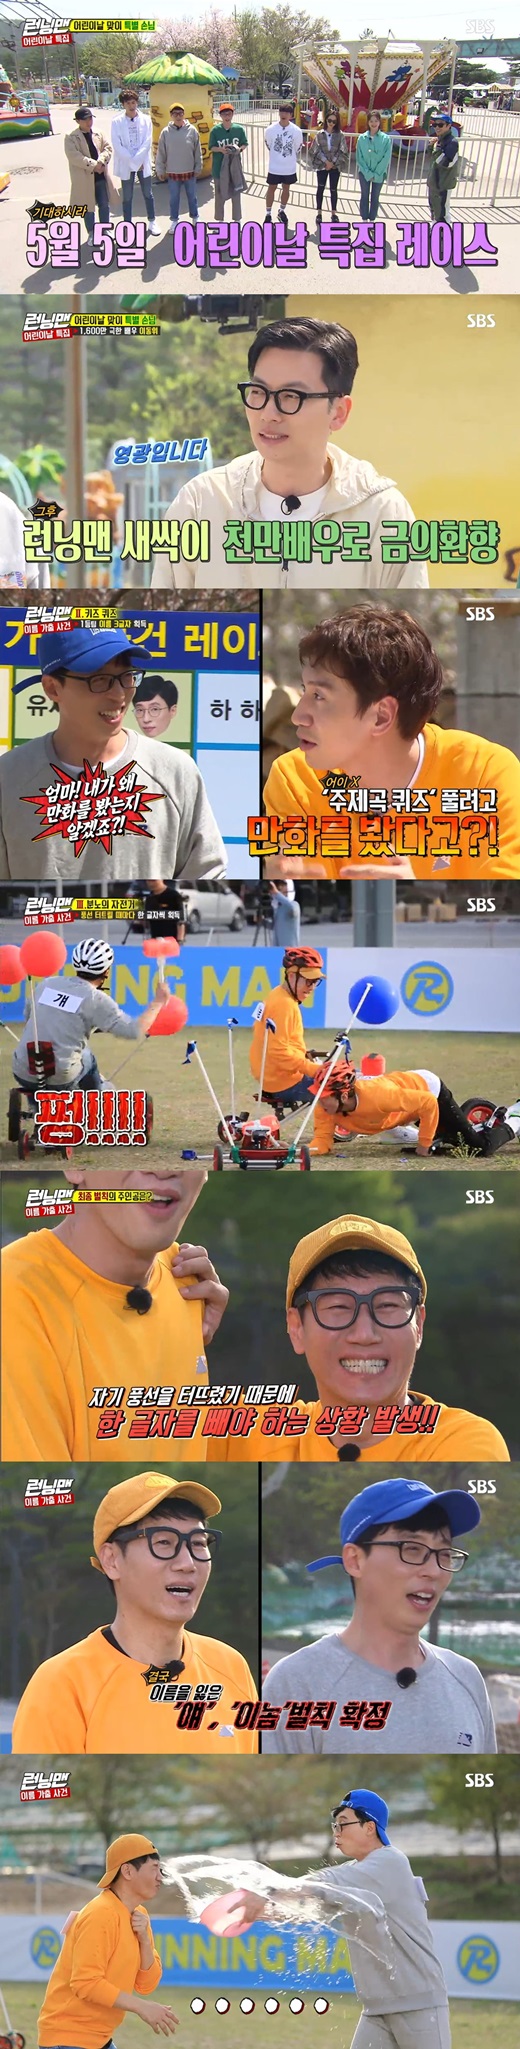 Yoo Jae-Suk and Ji Suk-jin became the main characters of the best one minute.According to Nielsen Korea, the average audience rating of SBS entertainment program Running Man, which was broadcast on the 5th, was 4.2% in the first part and 5.9% in the second part (based on the audience rating of households in the metropolitan area).The highest audience rating per minute was 6.4 percent.On the same day, Running Man was decorated with the special Name Runaway Case Race on Childrens Day, and the members went to Game to regain the name tag with their name.Guests included Yi Dong-hwi, who was about to release the film Little Clients; Father Avengers Ji Suk-jin, Yoo Jae-Suk and Haha became team leaders.The Ji Suk-jin team was teamed by Lee Kwang-soo and Song Ji-hyoga, the Yoo Jae-Suk team was teamed by Yi Dong-hwi and Yang Se-chan, and the Haha team was teamed by Jeon So-min and Kim Jong-kook.Since then, a full-scale race has begun.The first game was an age of memories that the first team could acquire four letters of name, and the second was a Kids Quiz, where the first team could acquire three letters of name.The last mission is a tump-bump bike that can find the name as needed. Every time you ride a bicycle and burst the balloon of your opponent, you get one letter.In the first half, the ace Kim Jong-kooks performance led to the victory of the small teams (Kim Jong-kook, Haha and Jeon So-min) and the remaining two teams in the second half.Lee Kwang-soos baby tricycle failed to beat the weight and broke two dongs, and the same team Yi Dong-hwi was in crisis because only one remaining balloon remained.Eventually, the race ended with Yang Se-chan bursting Lee Kwang-soos remaining balloon.As Yoo Jae-Suk found Seok, Ji Suk-jin also found all the names, but Ji Suk-jin had to take one out at the end of his balloon.Lee Kwang-soo, who won the scissors rock, took out the stone and Ji Suk-jin and Yoo Jae-Suk, who were not completed, were punished.The scene recorded the highest audience rating of 6.4% per minute, accounting for the best one minute.